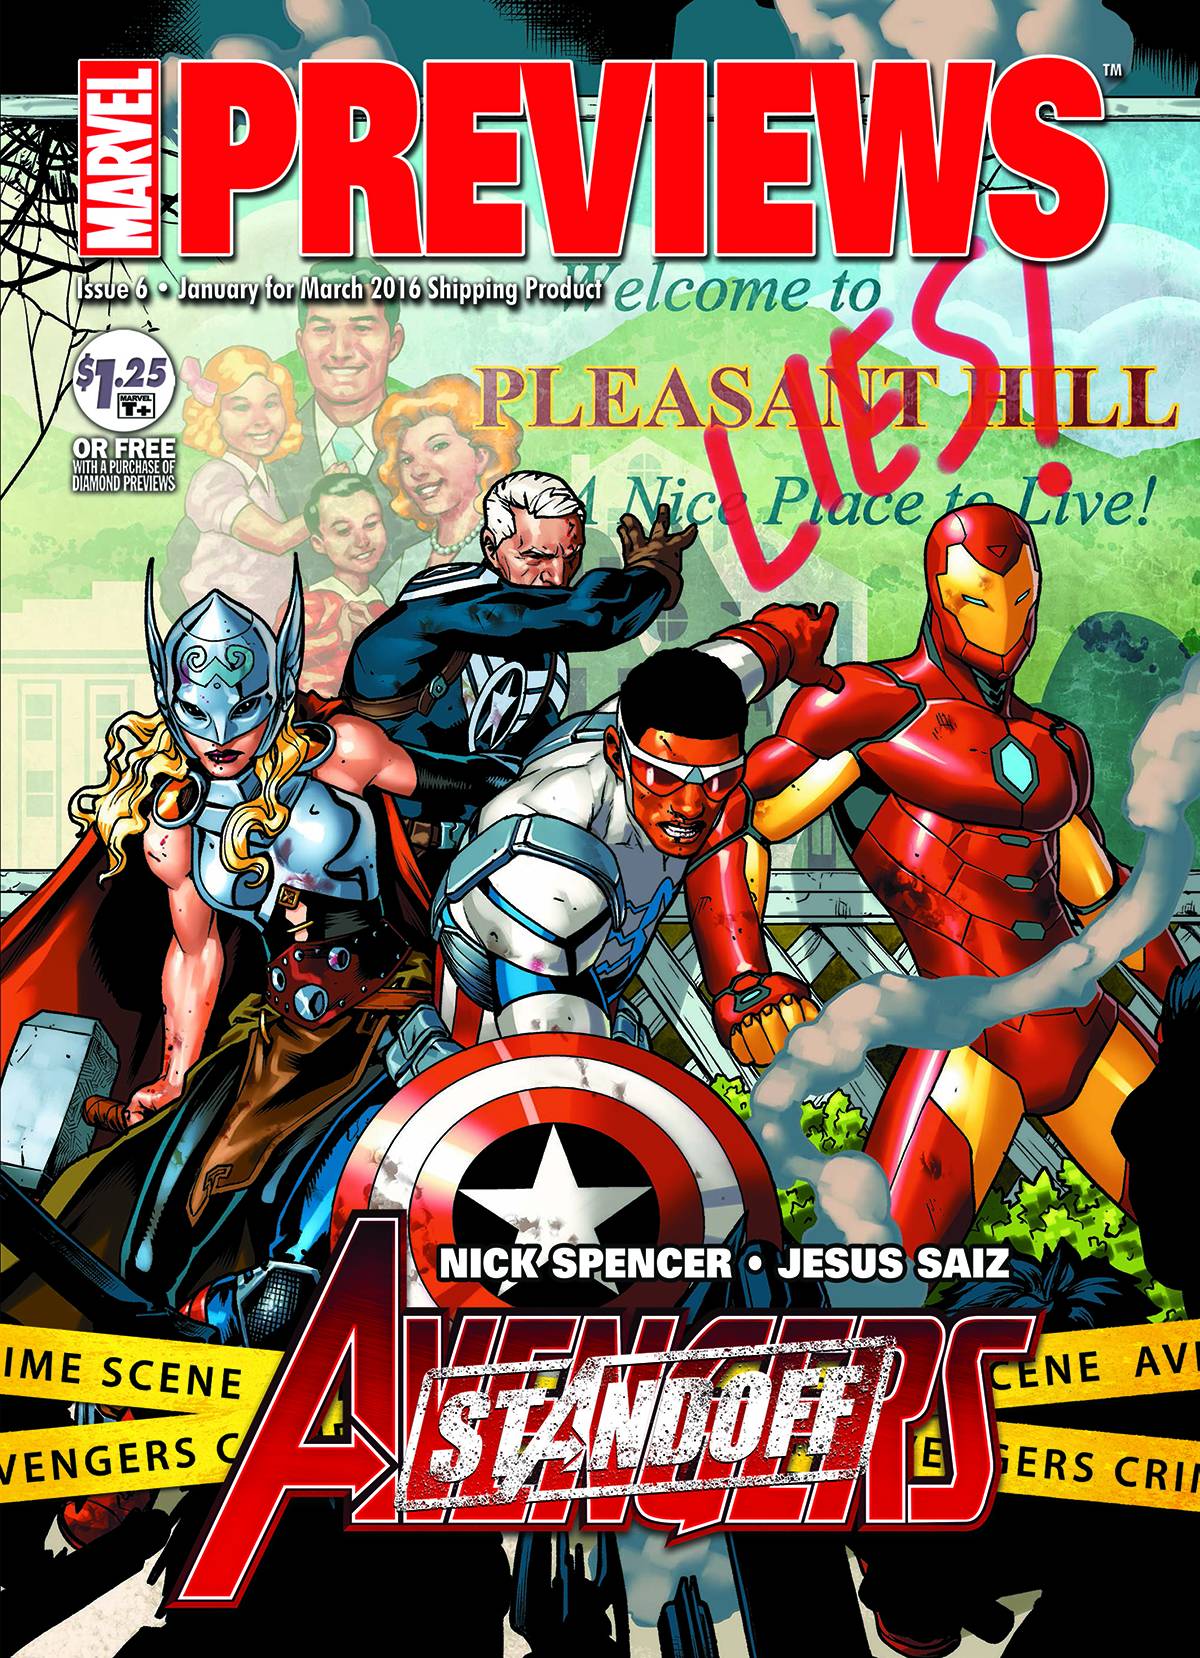 Marvel Previews #8 March 2016 Extras #152